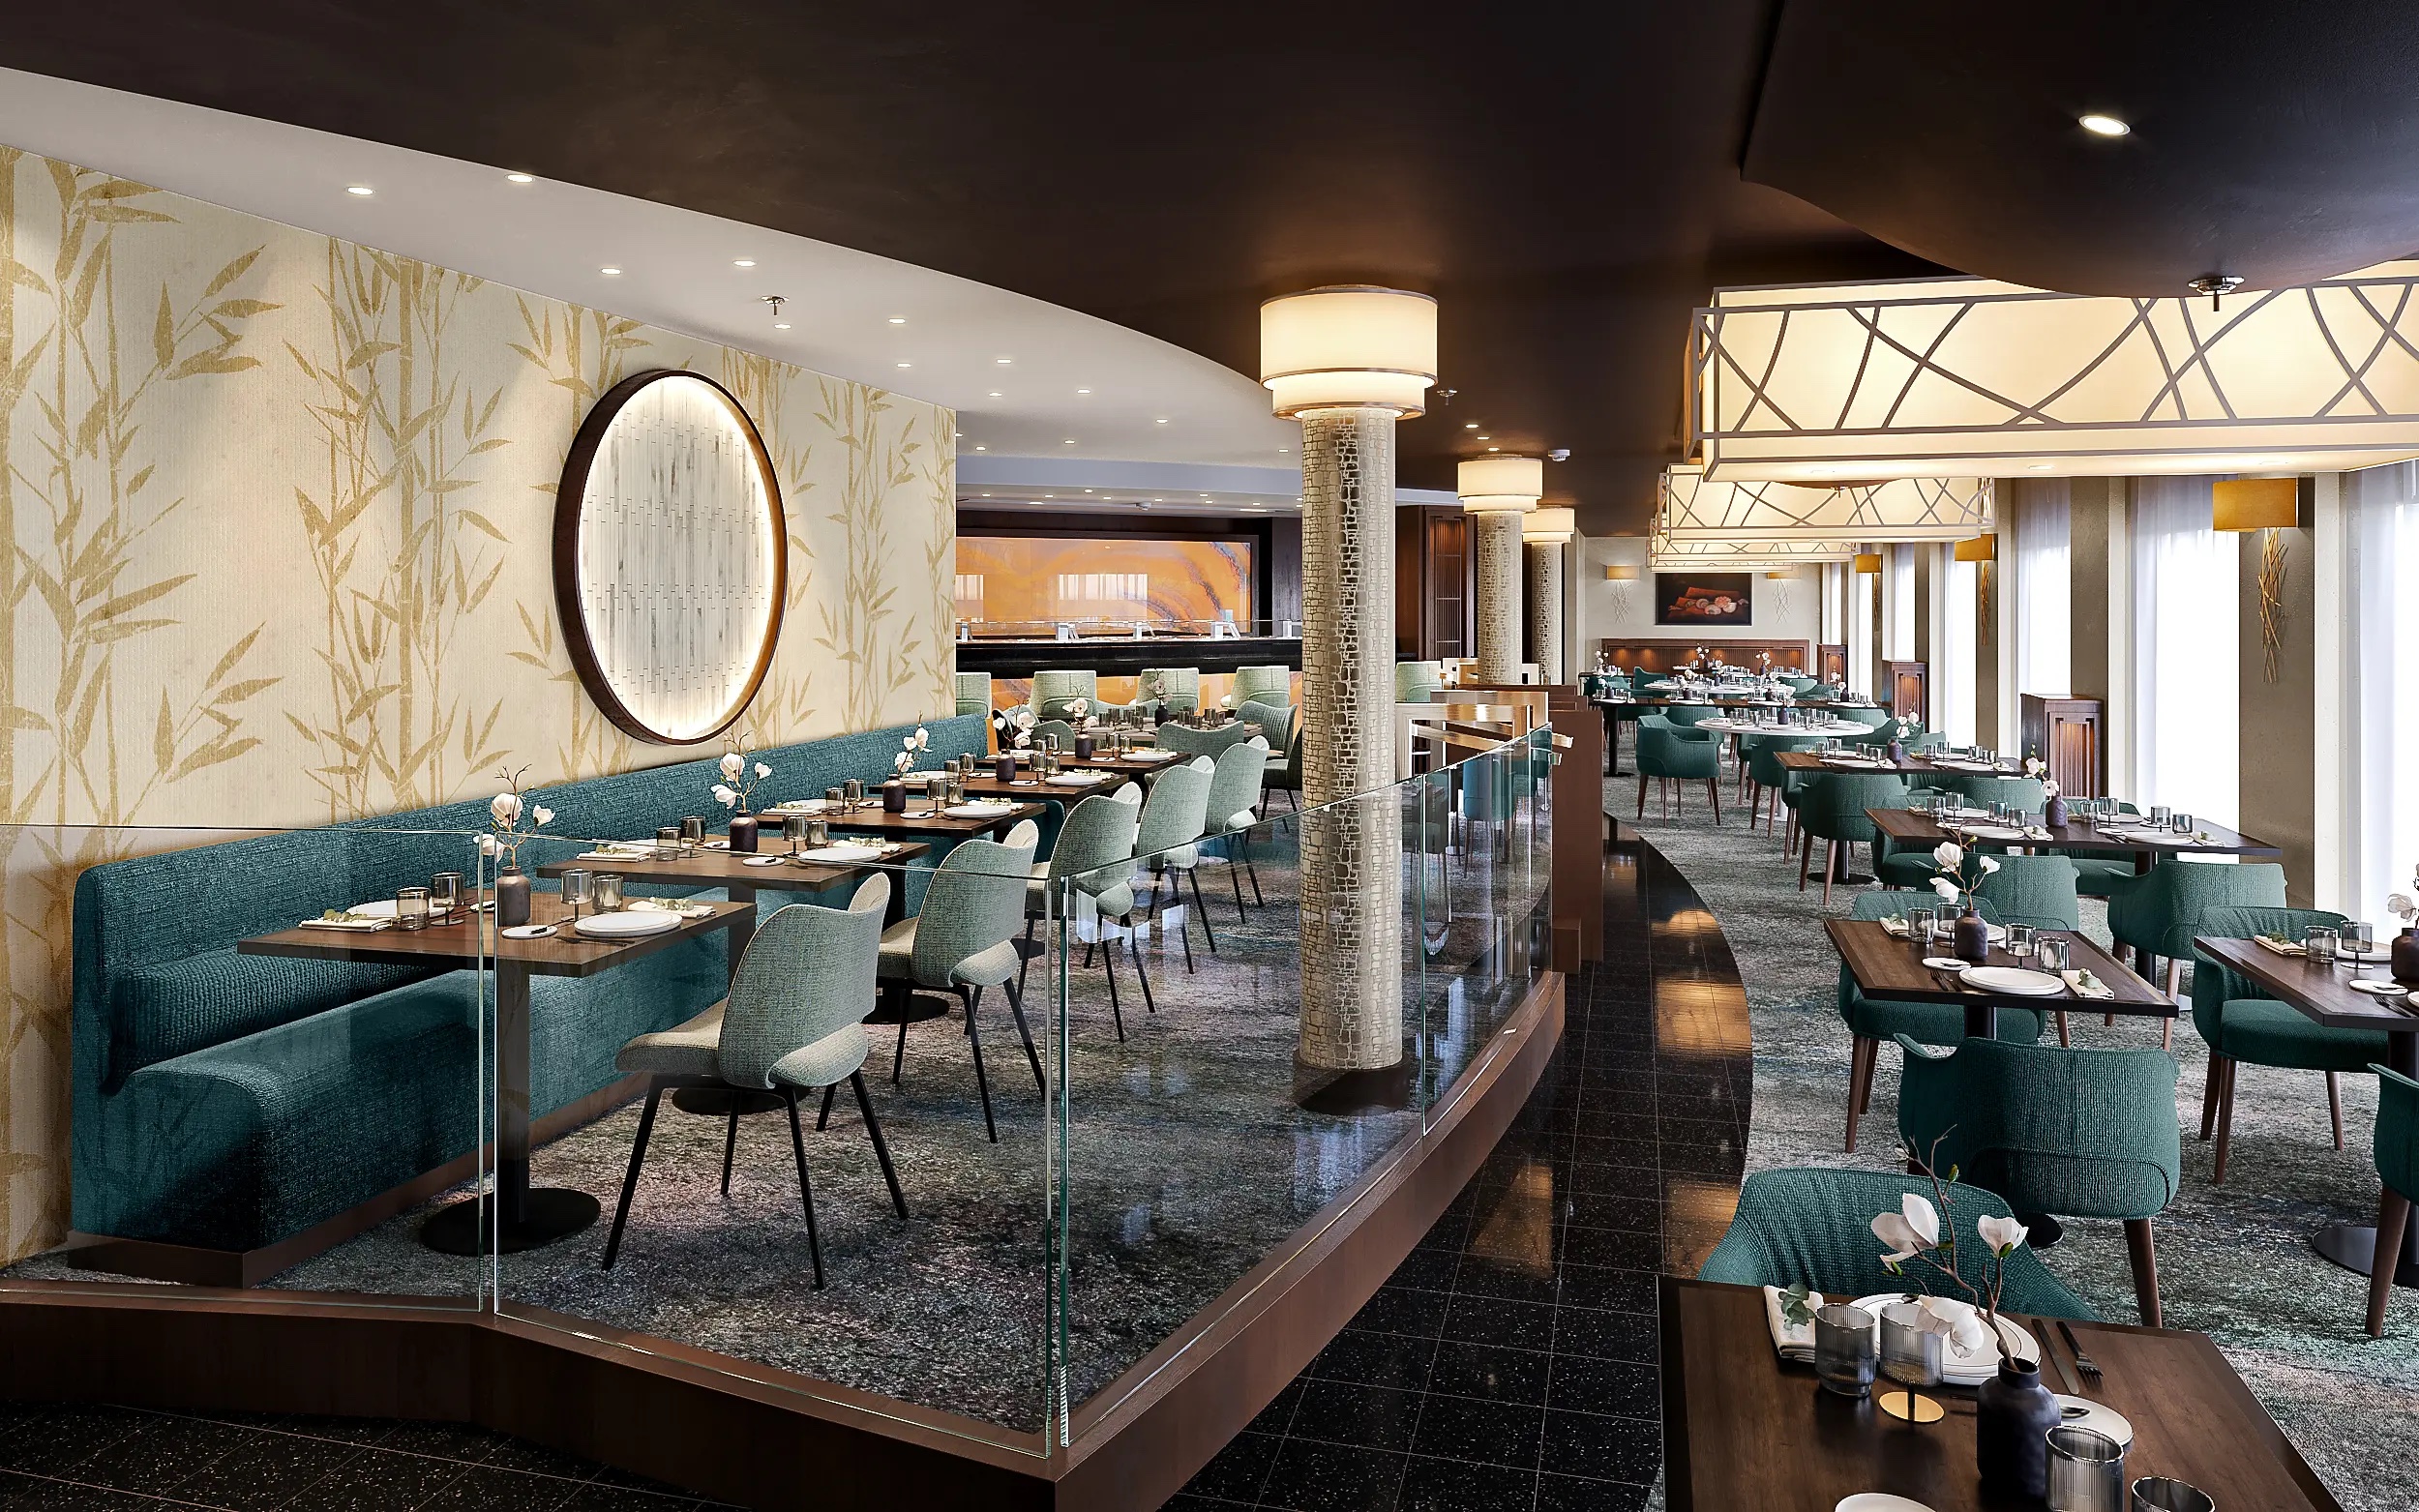 Continuing his relationship with the cruise line in its previous chapter, Master Chef Nobu is back aboard Crystal Cruises.